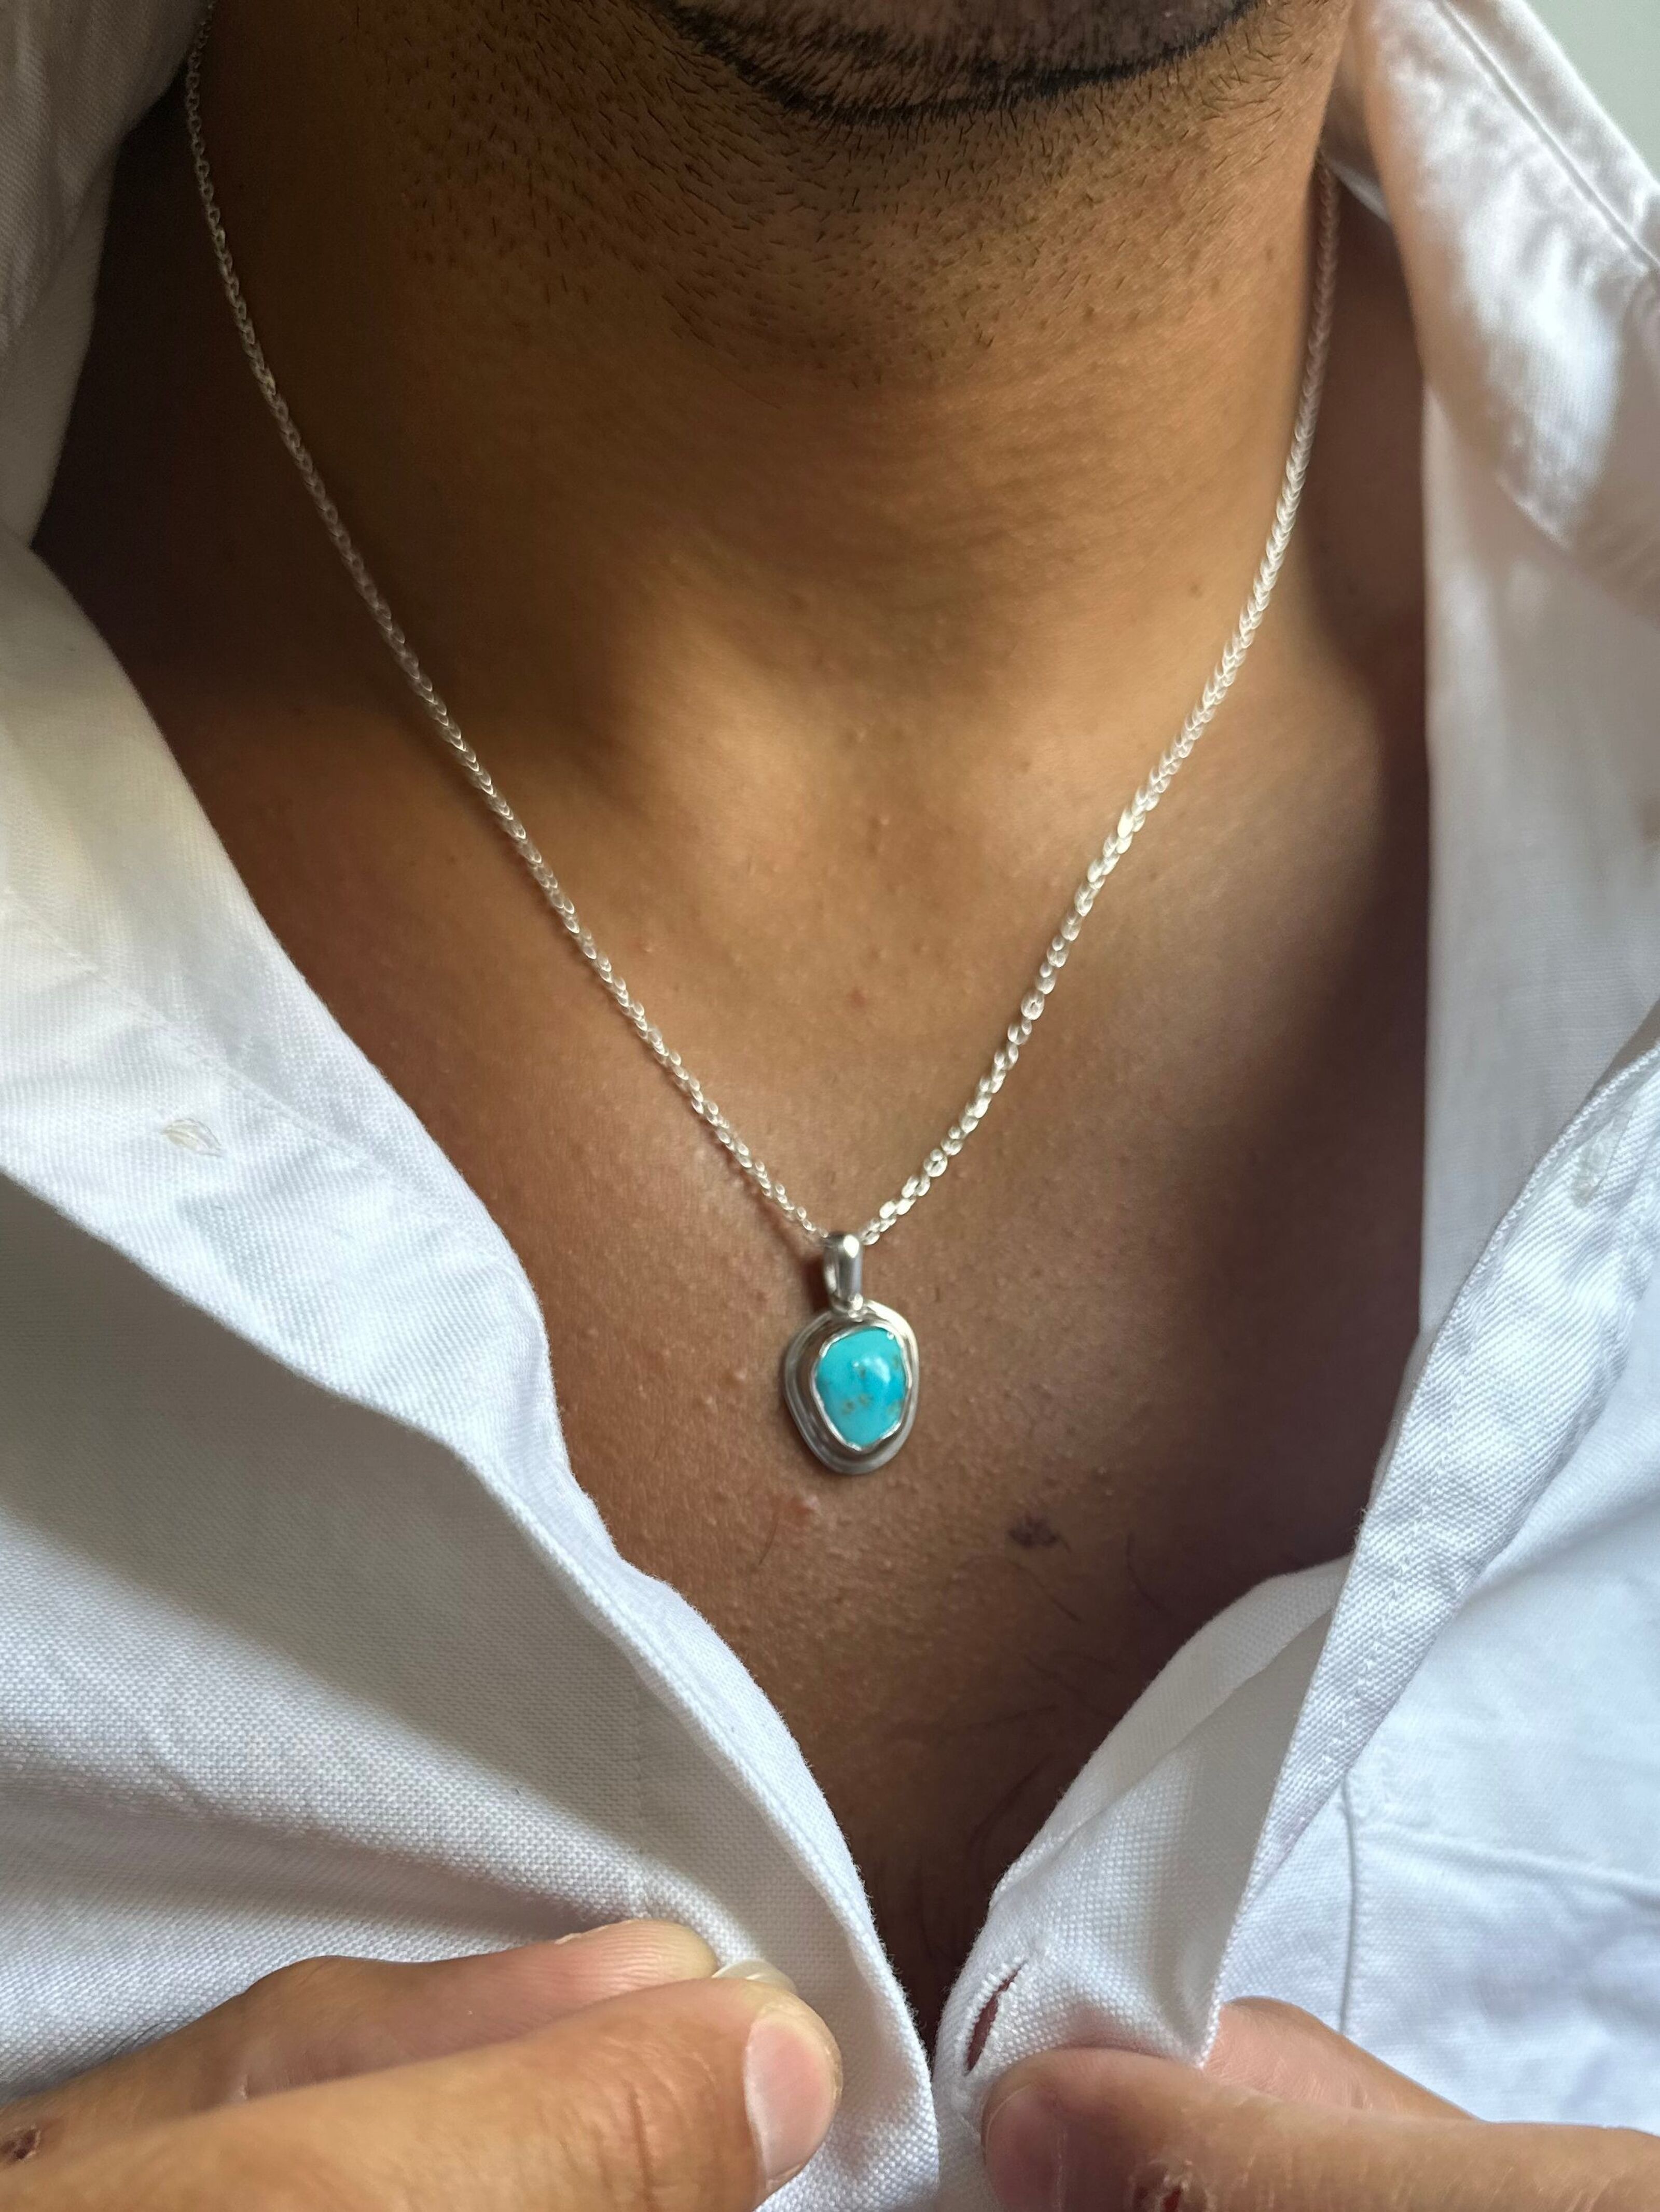 Buy wholesale Real from SIlver Chain Necklace Stone Necklace, Men, Pendant, Men, Made Men\'s Turquoise Turquoise Sterling Silver Pendant